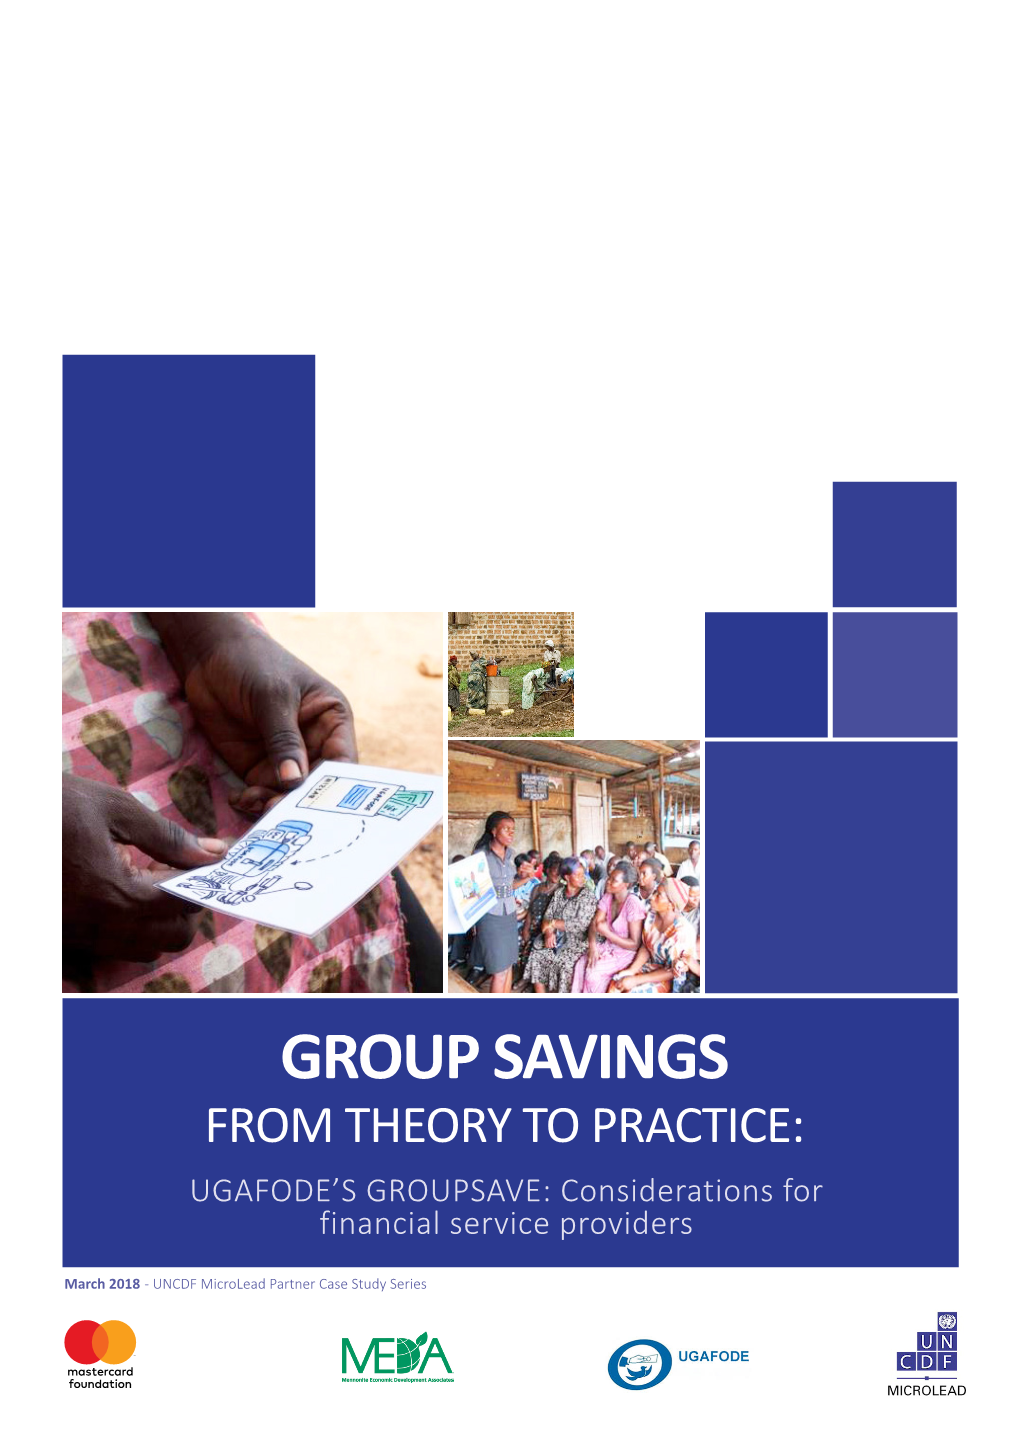 Group Savings from Theory to Practice: UGAFODE's GROUPSAVE